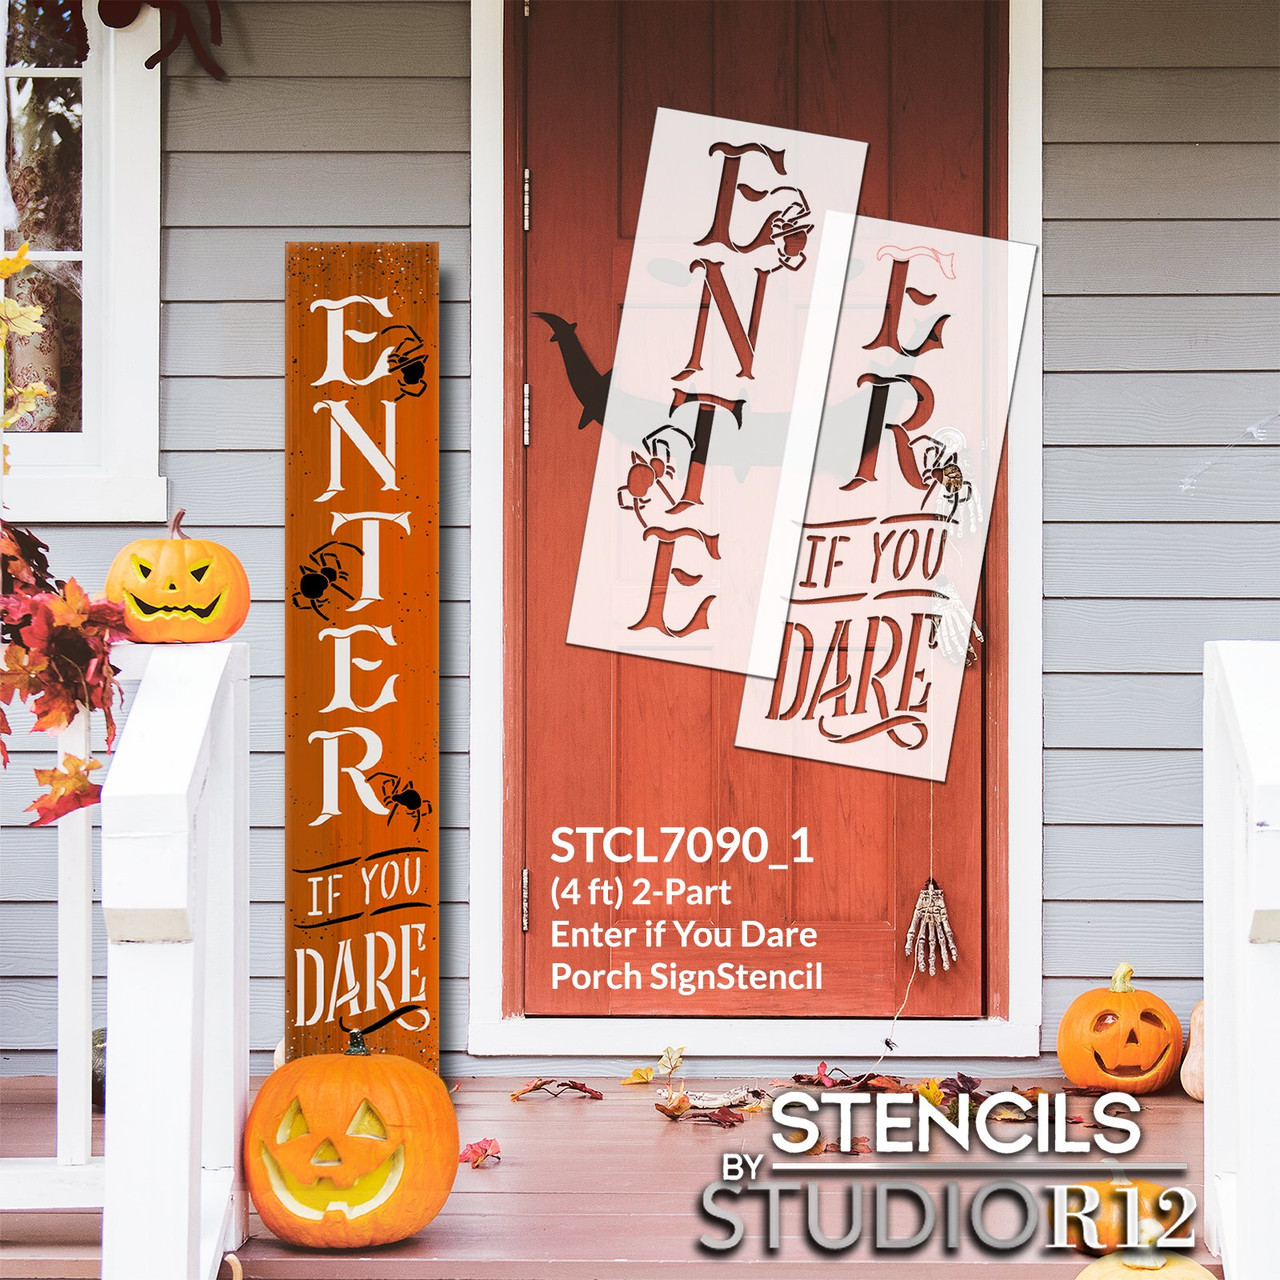 Enter If You Dare Tall Porch Sign Stencil by StudioR12 - Select Size - USA Made - DIY Spider Vertical Leaner Signs for Halloween - Paint Outdoor Fall Decor - STCL7090